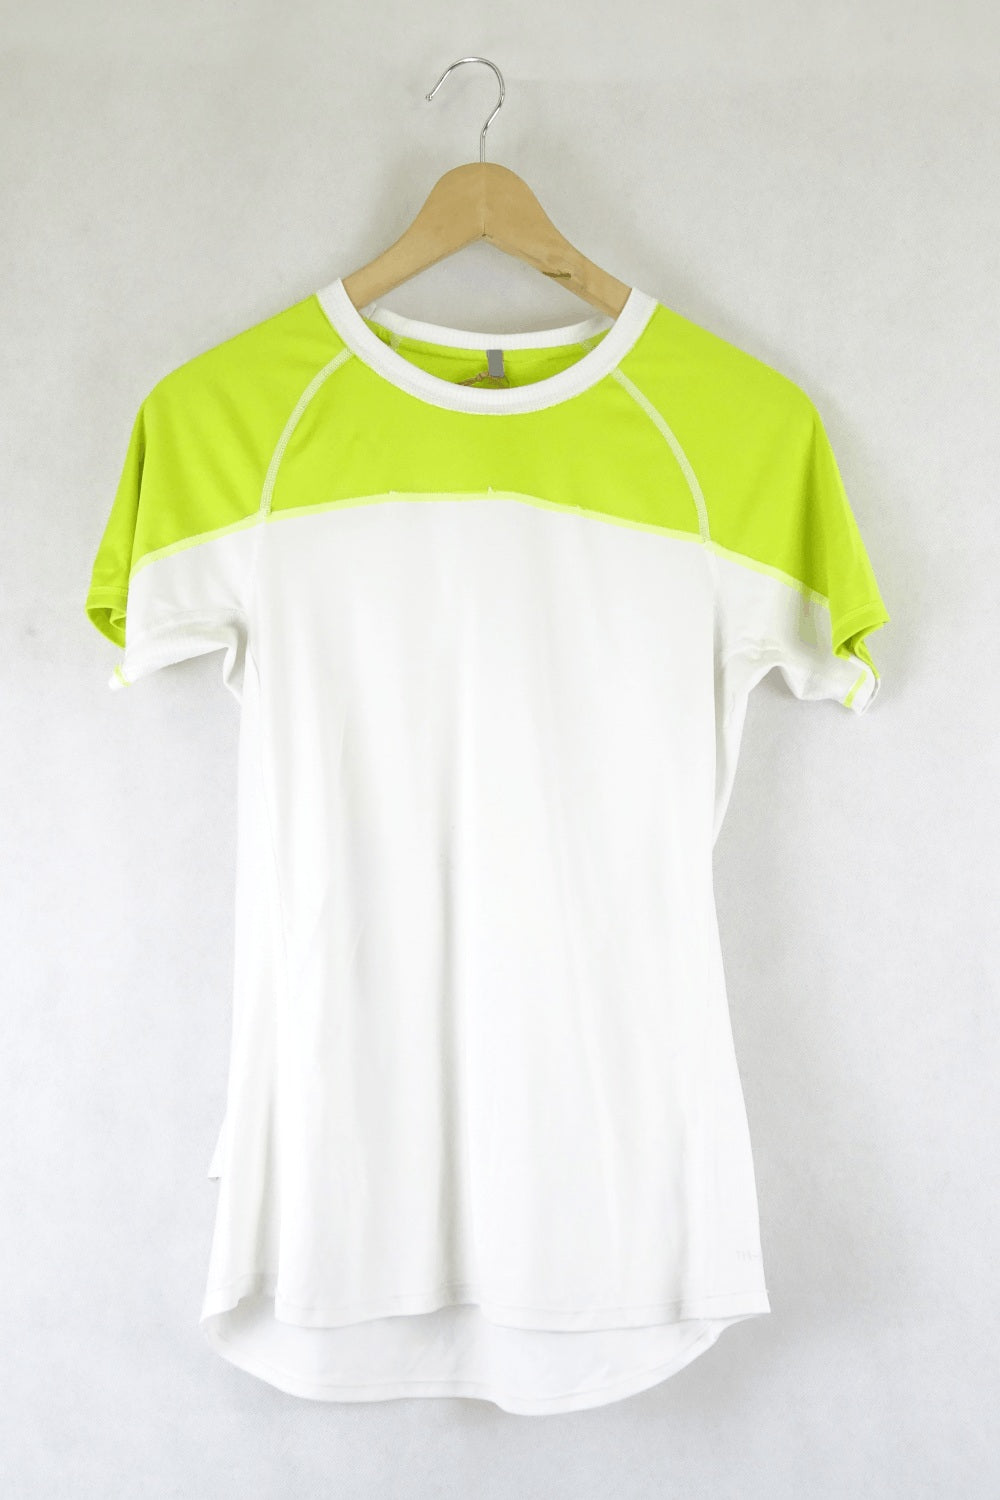 Nike Yellow And White Top S